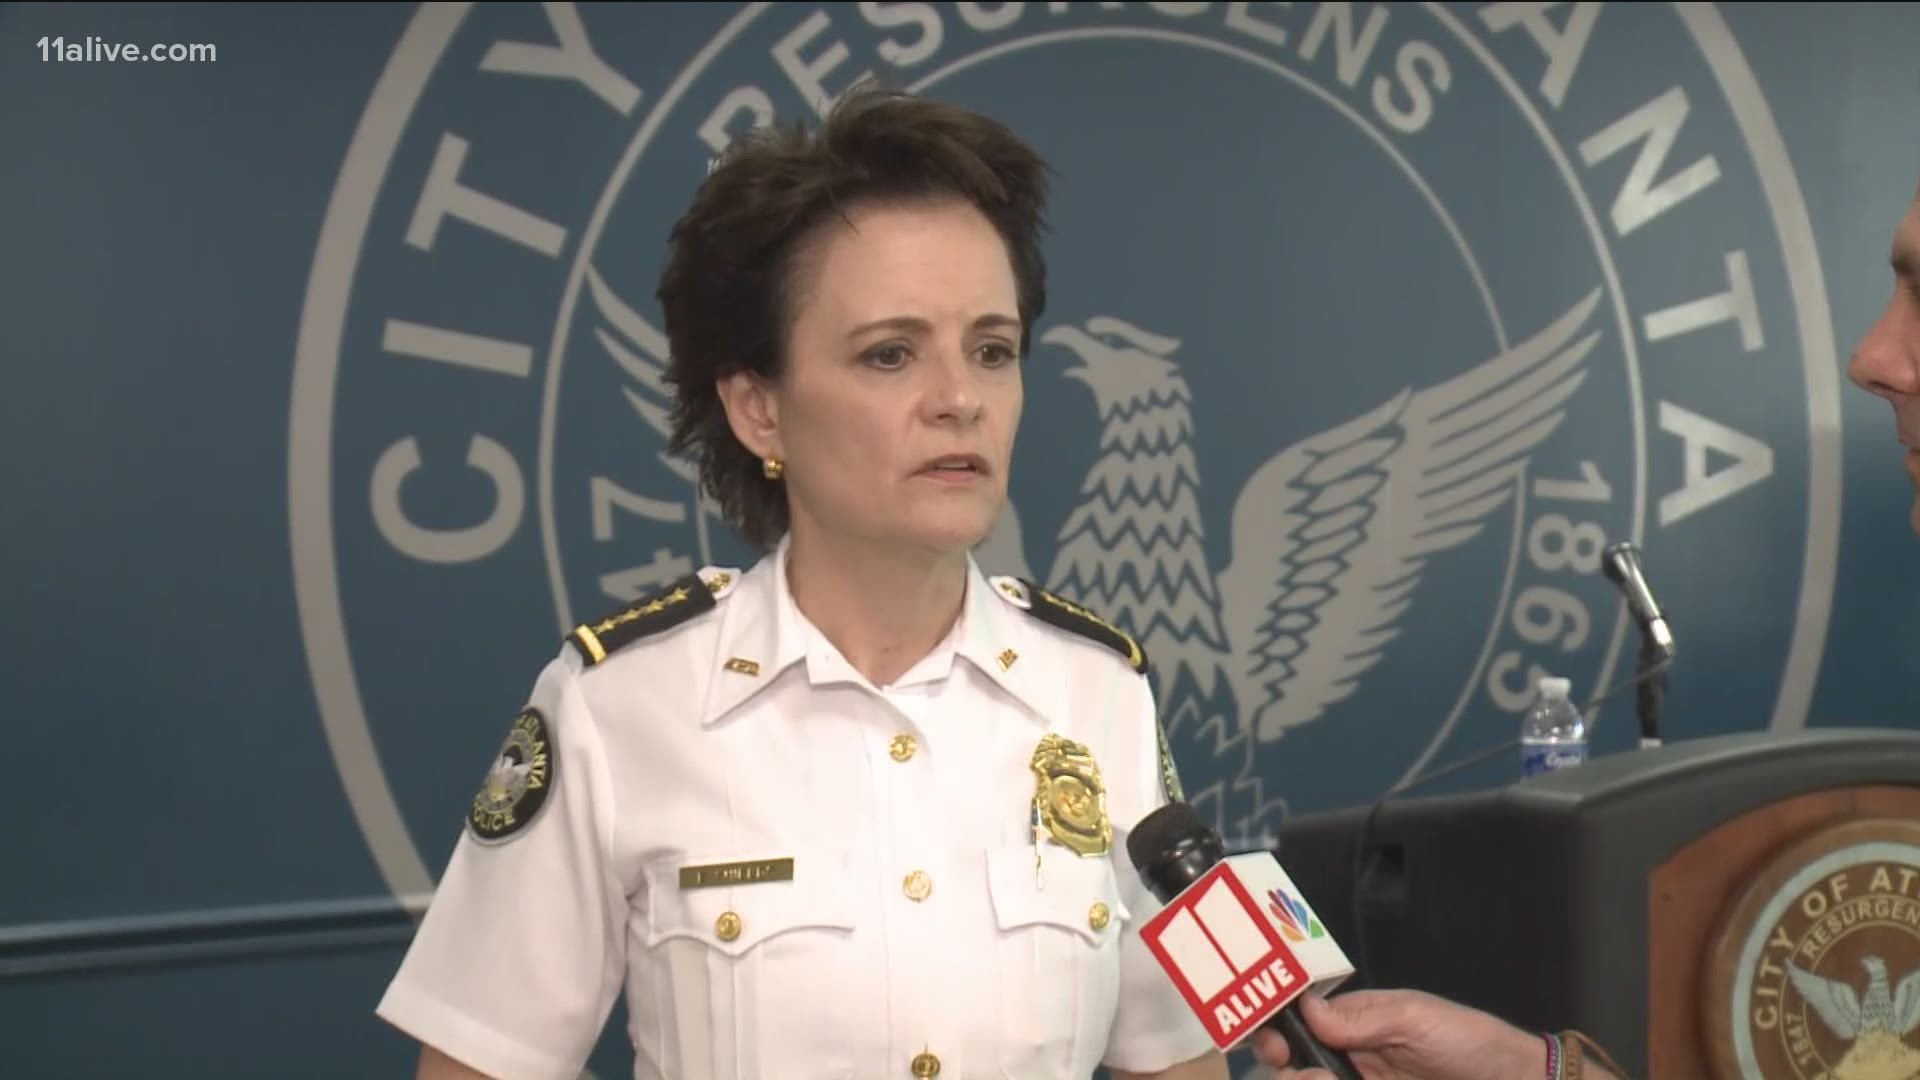 Atlanta Police Chief Erika Shields said the violence in Atlanta was not protesting and was more like organized crime that was planned in advance.